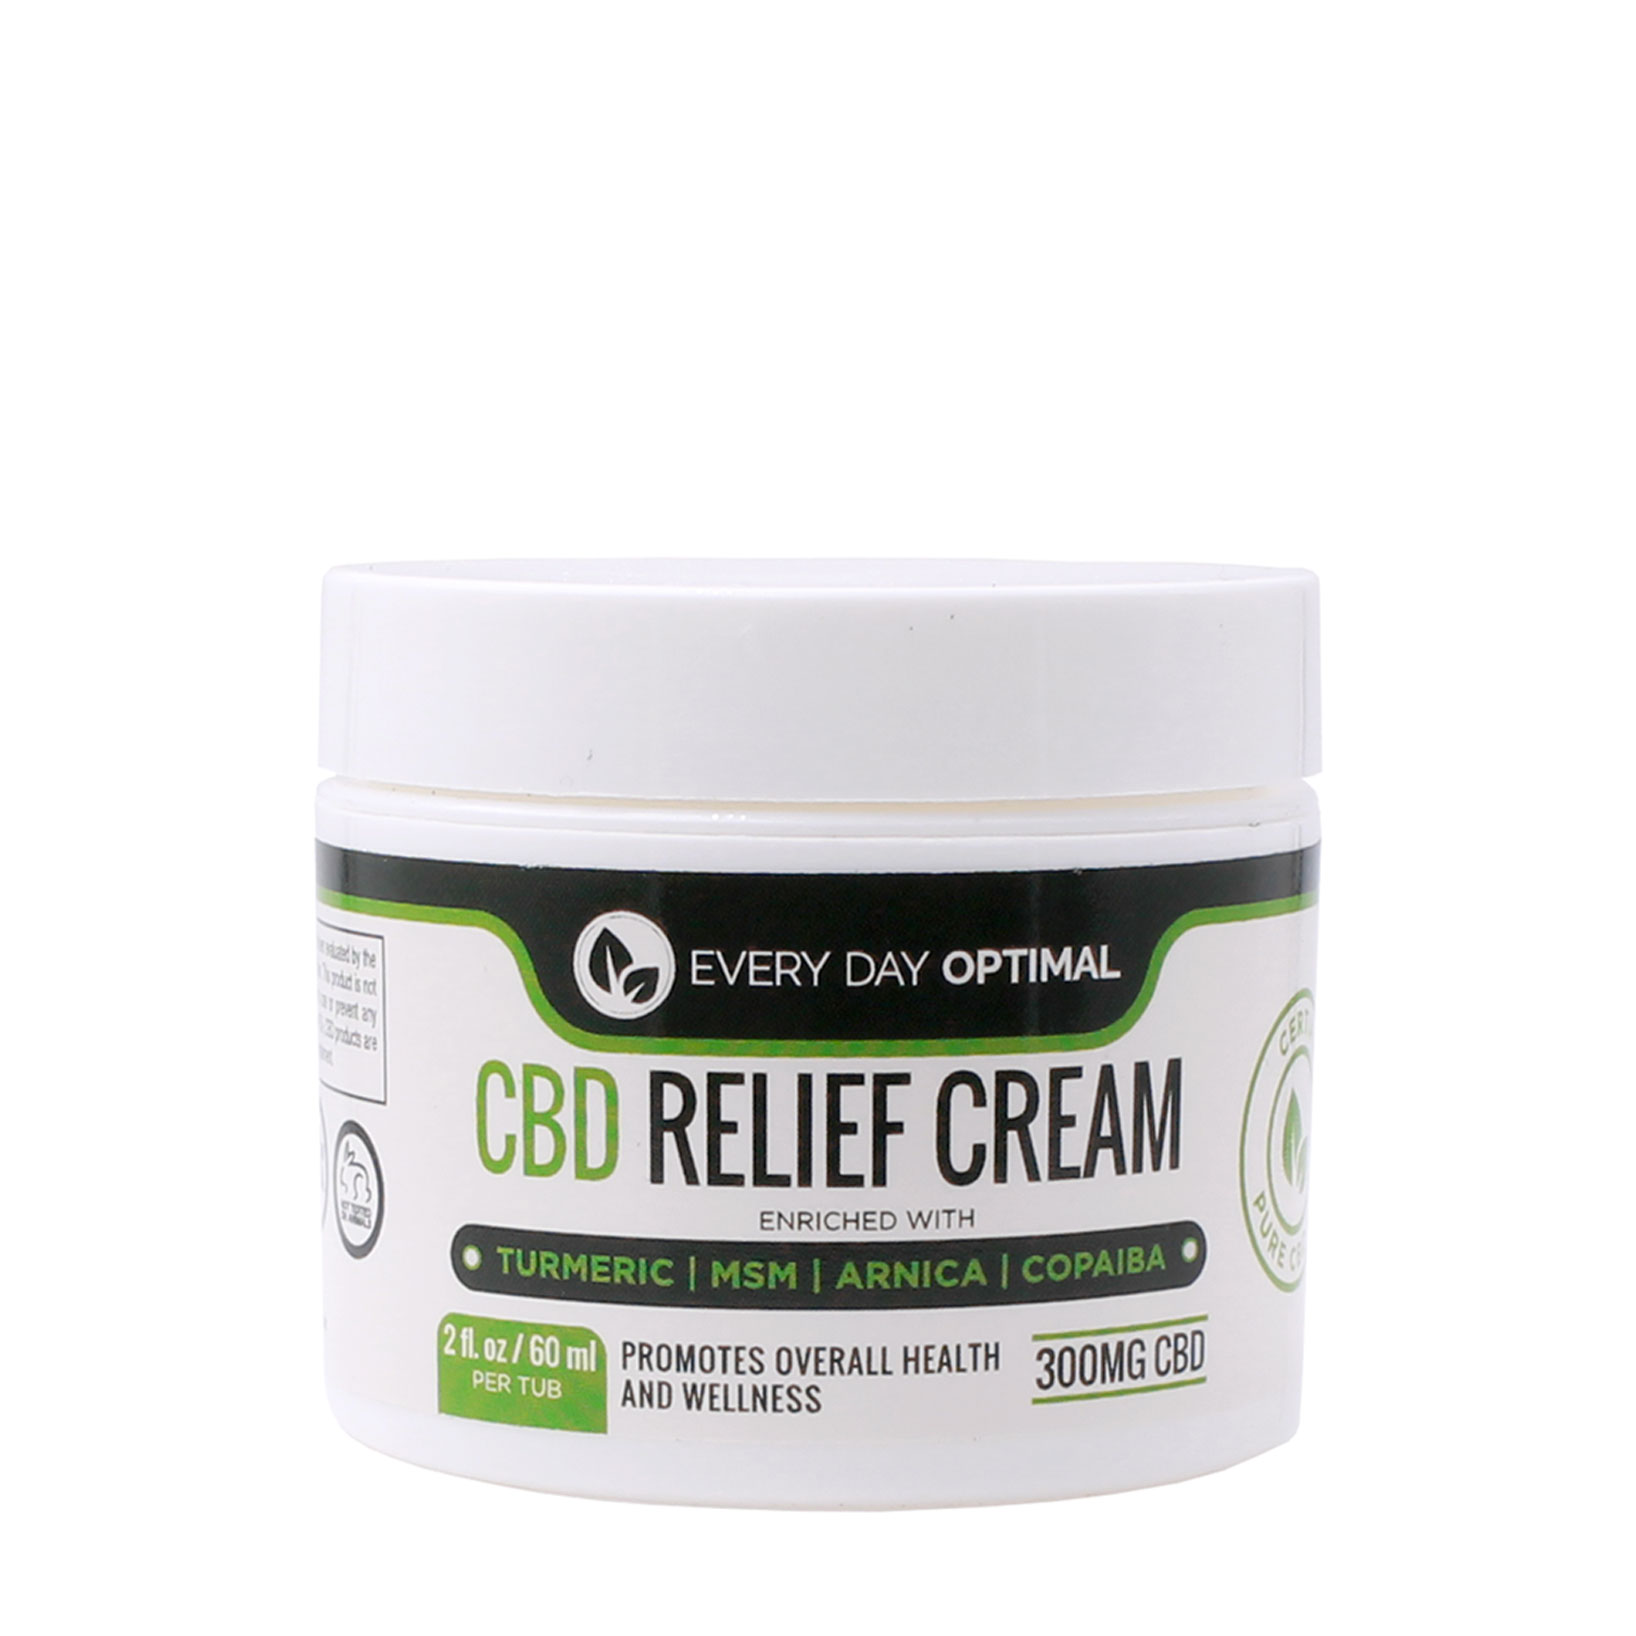 PAIN RELIEF CBD CREAM - Cbd|Pain|Cream|Products|Relief|Creams|Hemp|Product|Skin|Oil|Arthritis|Ingredients|Body|Topicals|Muscle|Effects|Inflammation|Brand|People|Spectrum|Health|Oils|Salve|Thc|Quality|Benefits|Menthol|Way|Joints|Aches|Research|Potency|Results|Creams|Plant|Cannabinoids|Brands|Naturals|Cons|Muscles|Cbd Cream|Cbd Creams|Pain Relief|Cbd Products|Cbd Topicals|Cbd Oil|Fab Cbd|Joint Pain|Full Spectrum Cbd|Cbd Pain Cream|Chronic Pain|United States|Cbd Oils|Topical Products|Rheumatoid Arthritis|Topical Cbd Cream|Endocannabinoid System|Pain Relief Cream|Green Roads|Pain Management|Full-Spectrum Cbd|Joy Organics|Cbd Pain Relief|Topical Cream|Topical Cbd Products|Essential Oils|Cheef Botanicals|Cbd Isolate|Side Effects|Cbd Costs